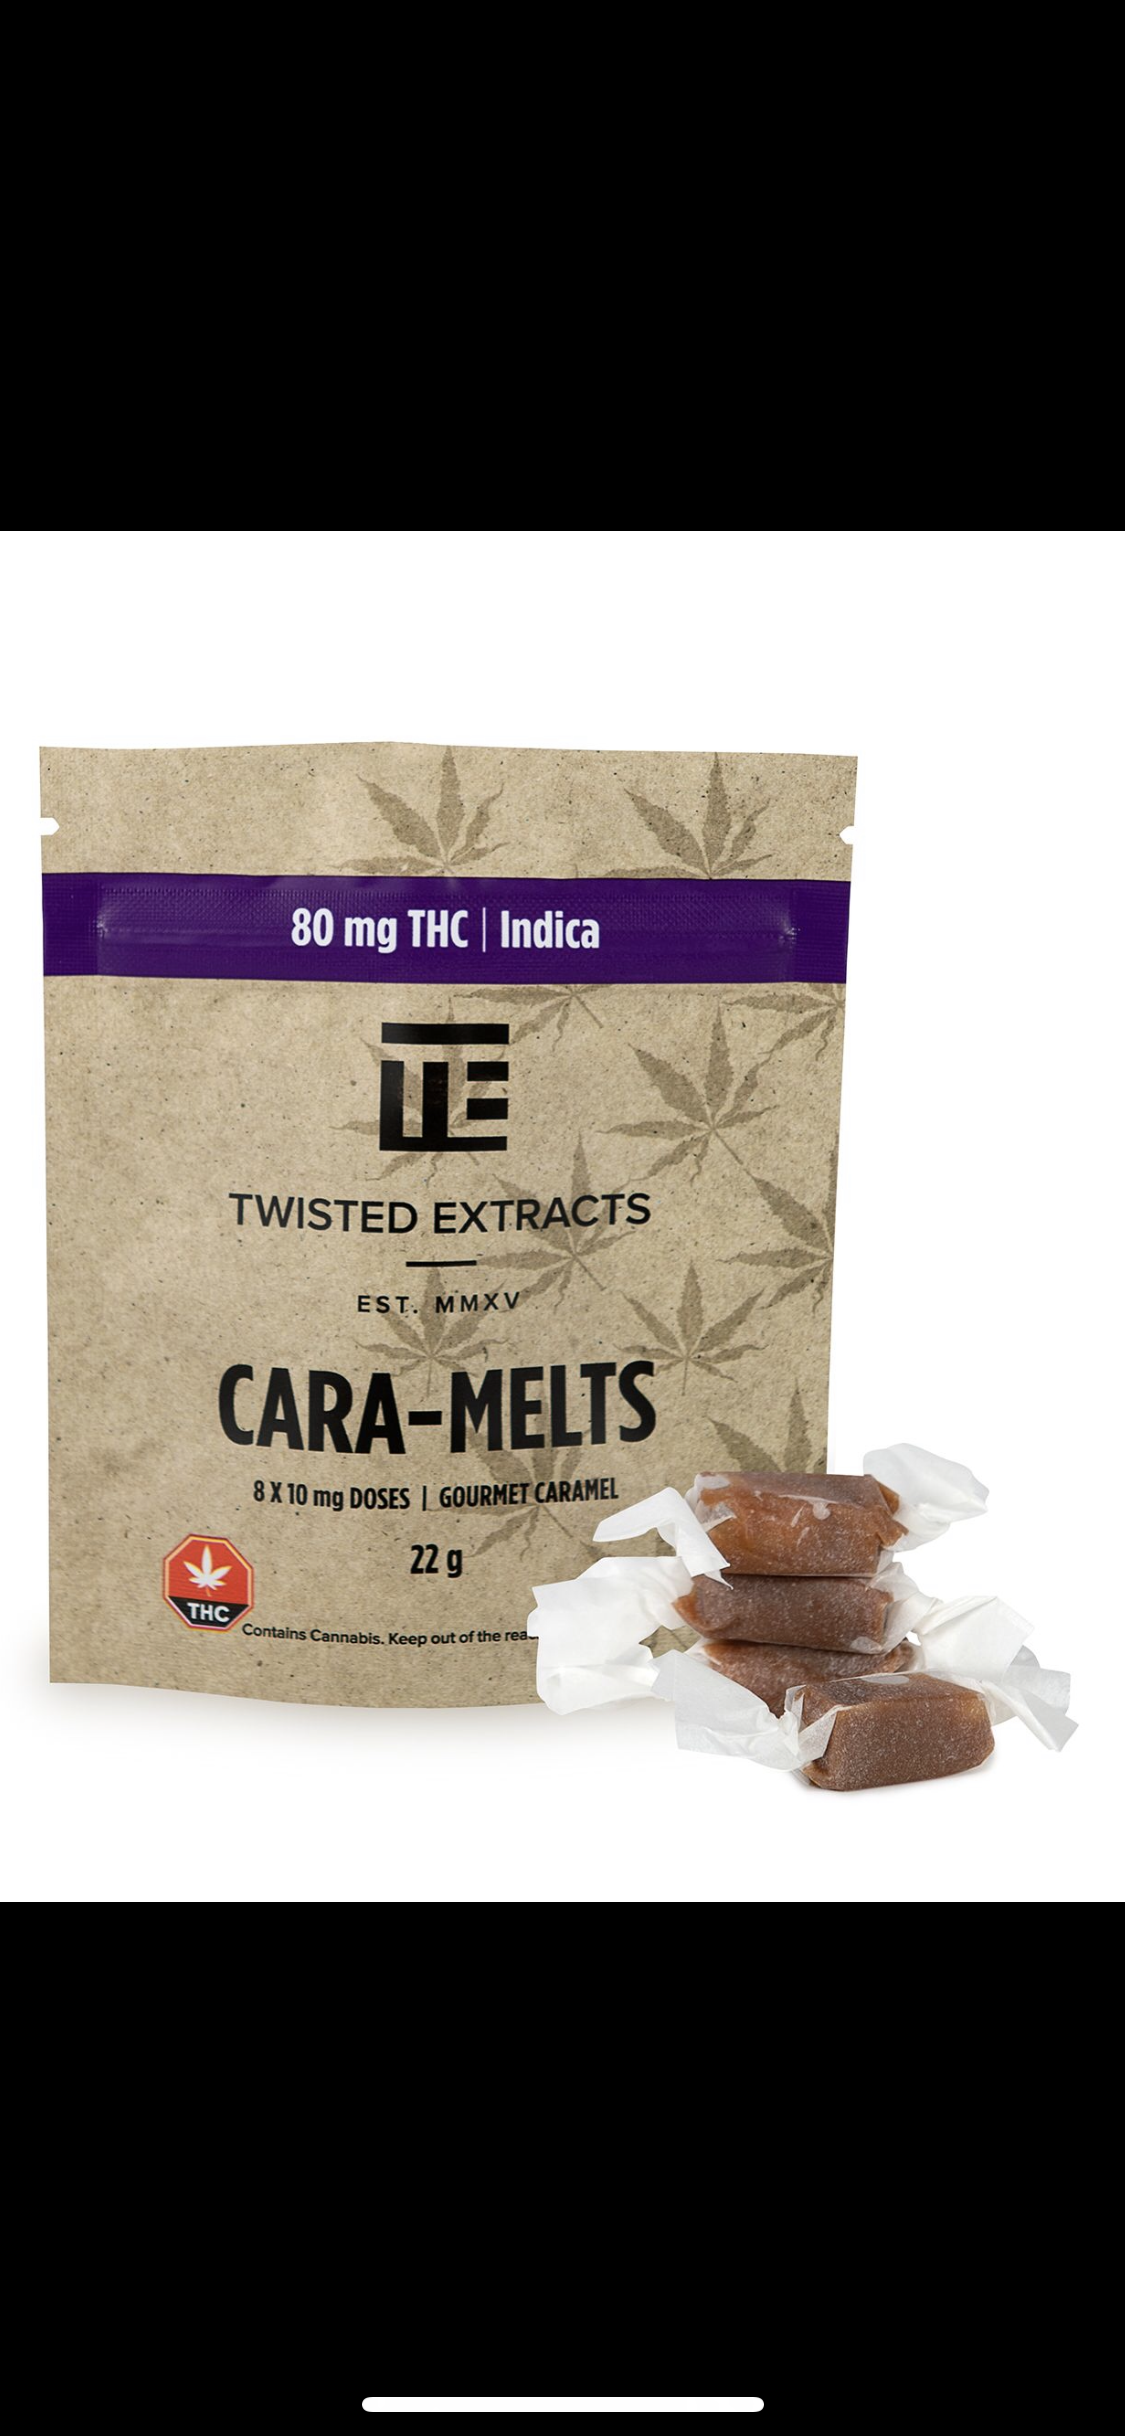 Twisted Extracts 80 mg THC Cara-Melts – Indica